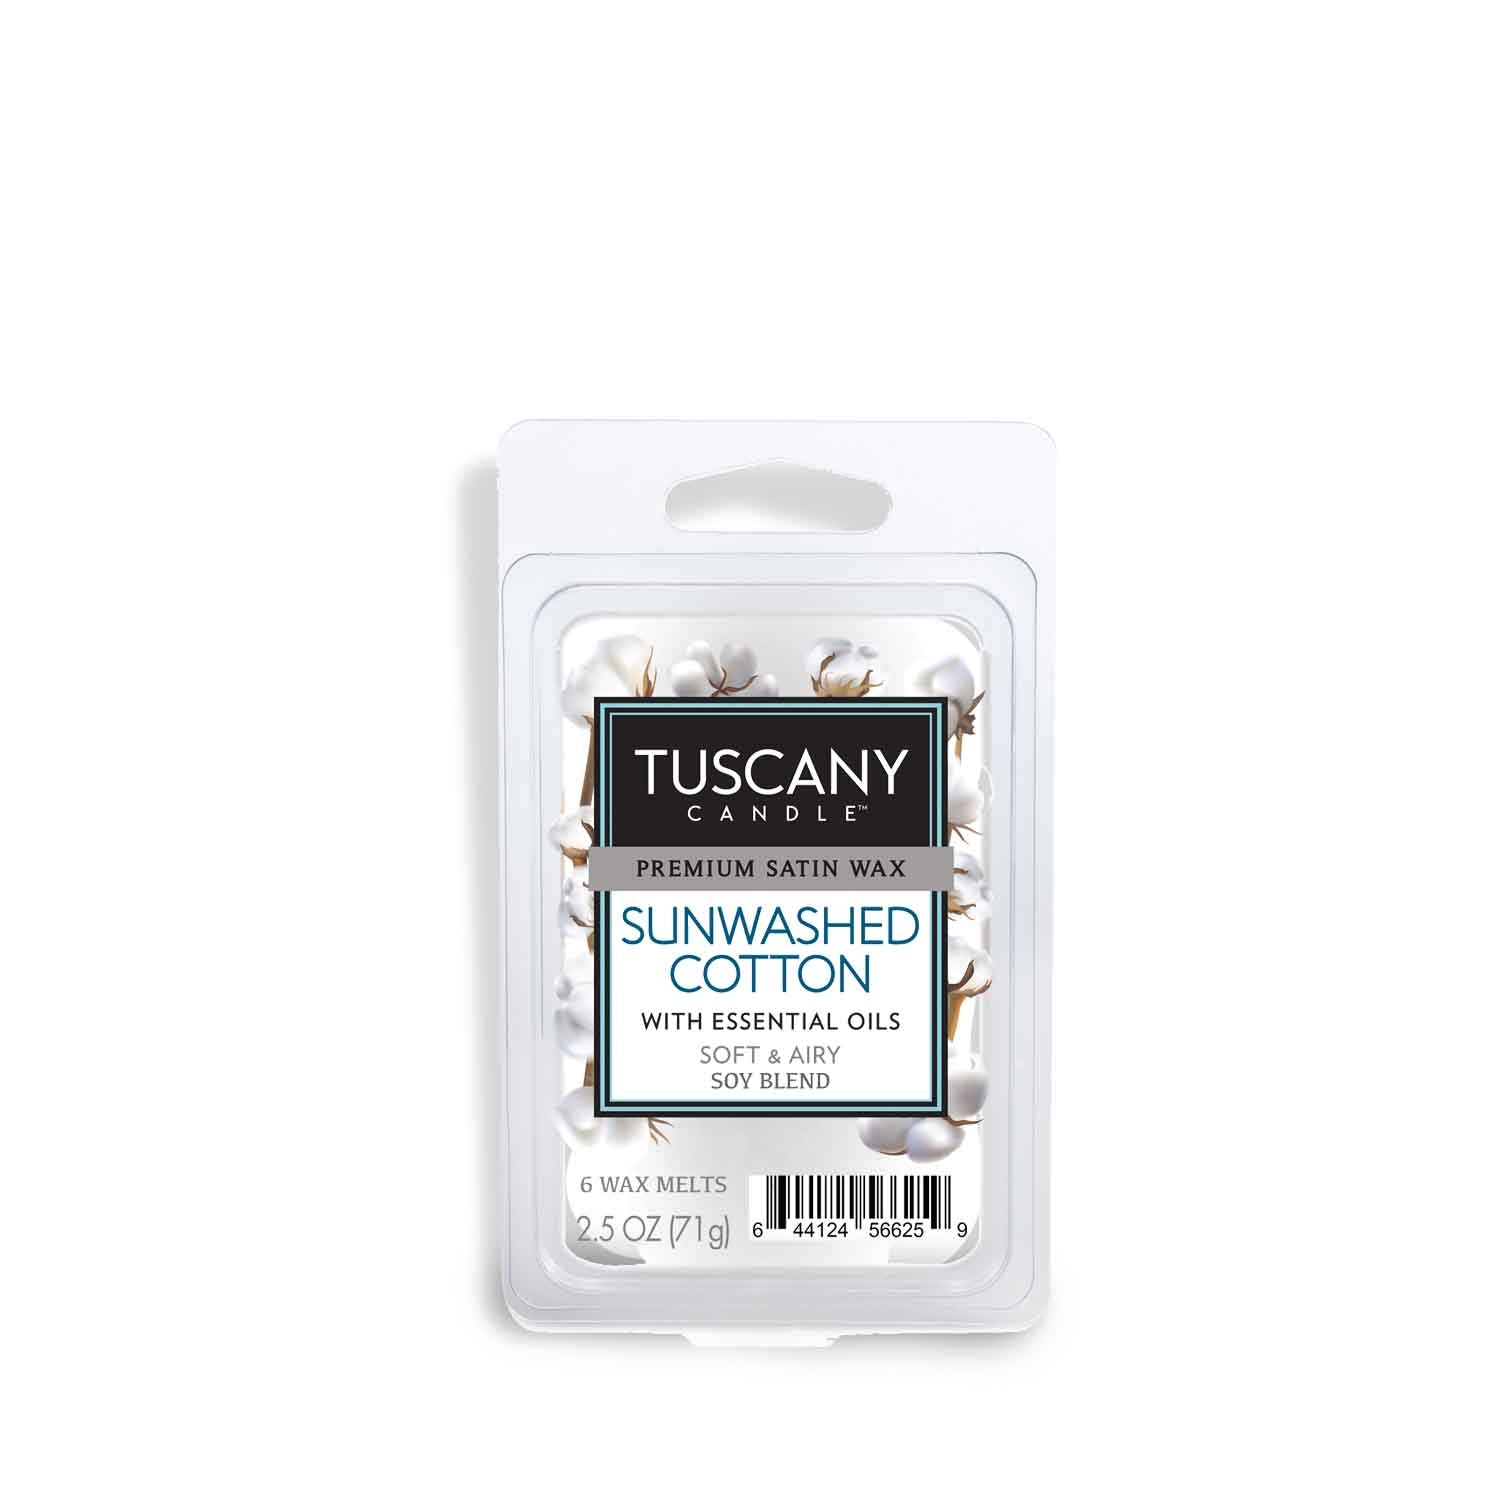 Indulge in the fragrance notes of Tuscany with our Sunwashed Cotton Scented Wax Melt (2.5 oz) from Tuscany Candle®.